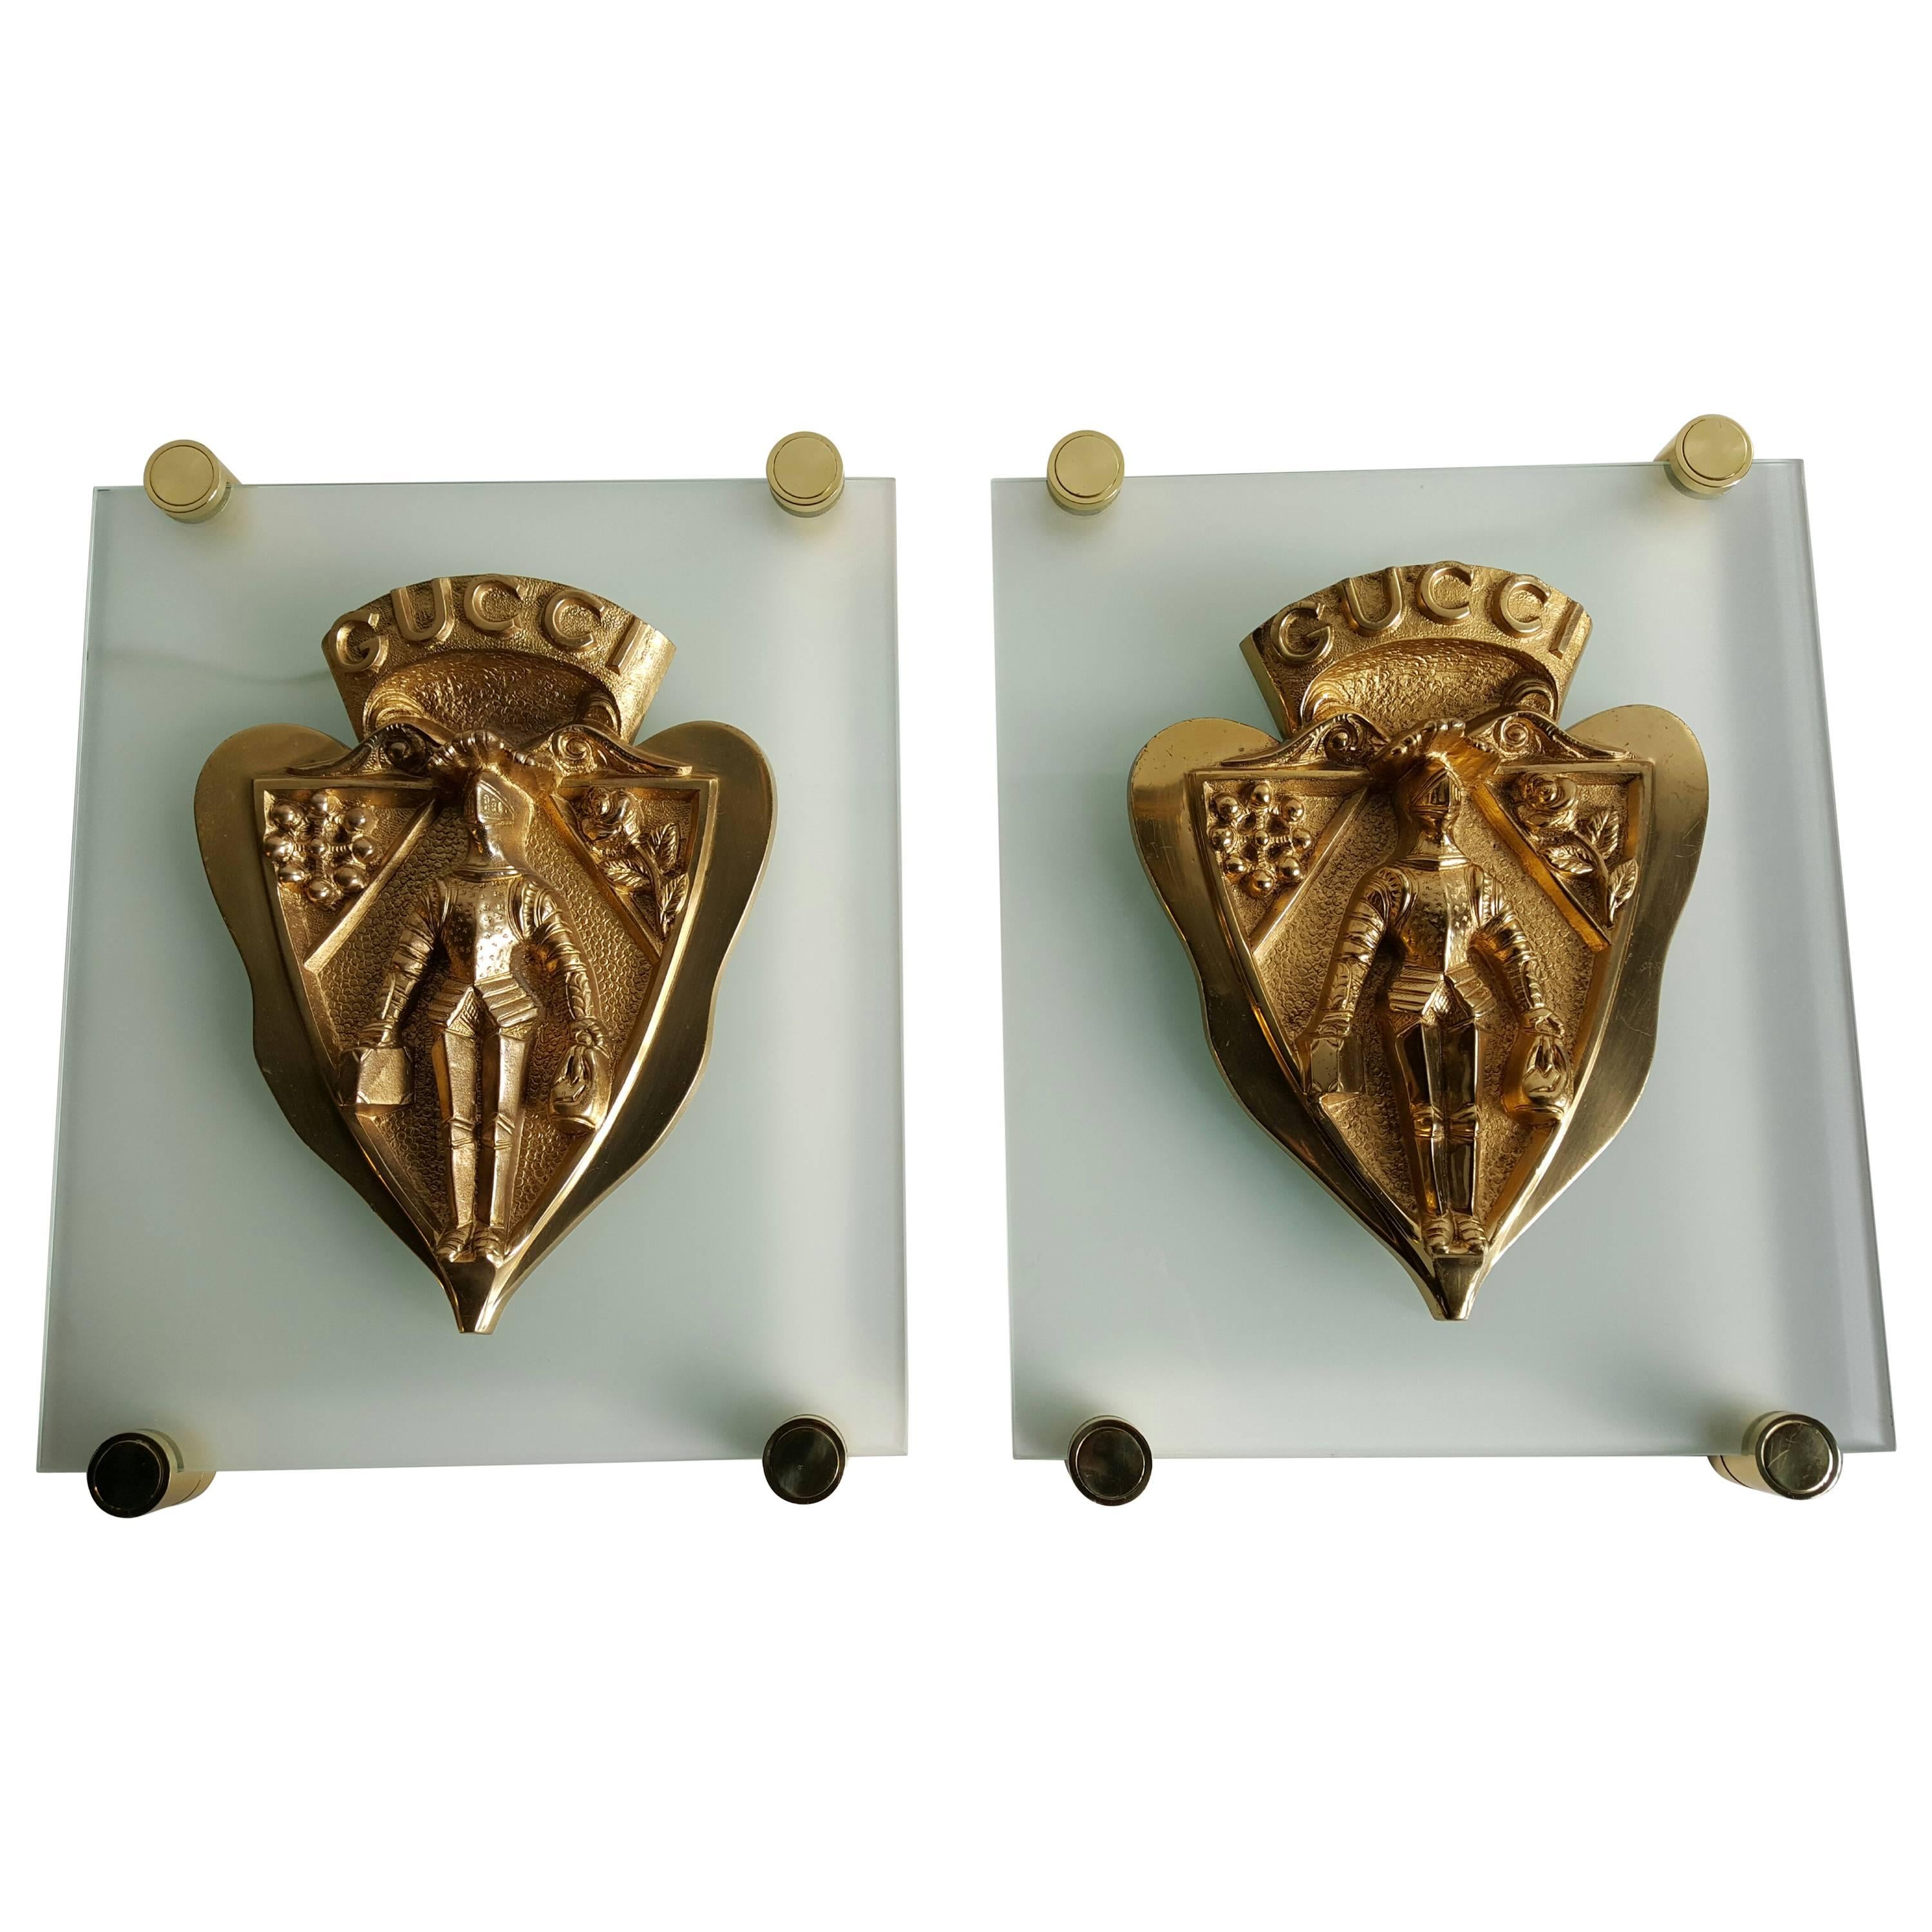 Rare Gucci Store Shield Wall Plaques Sconces Bronze and Glass